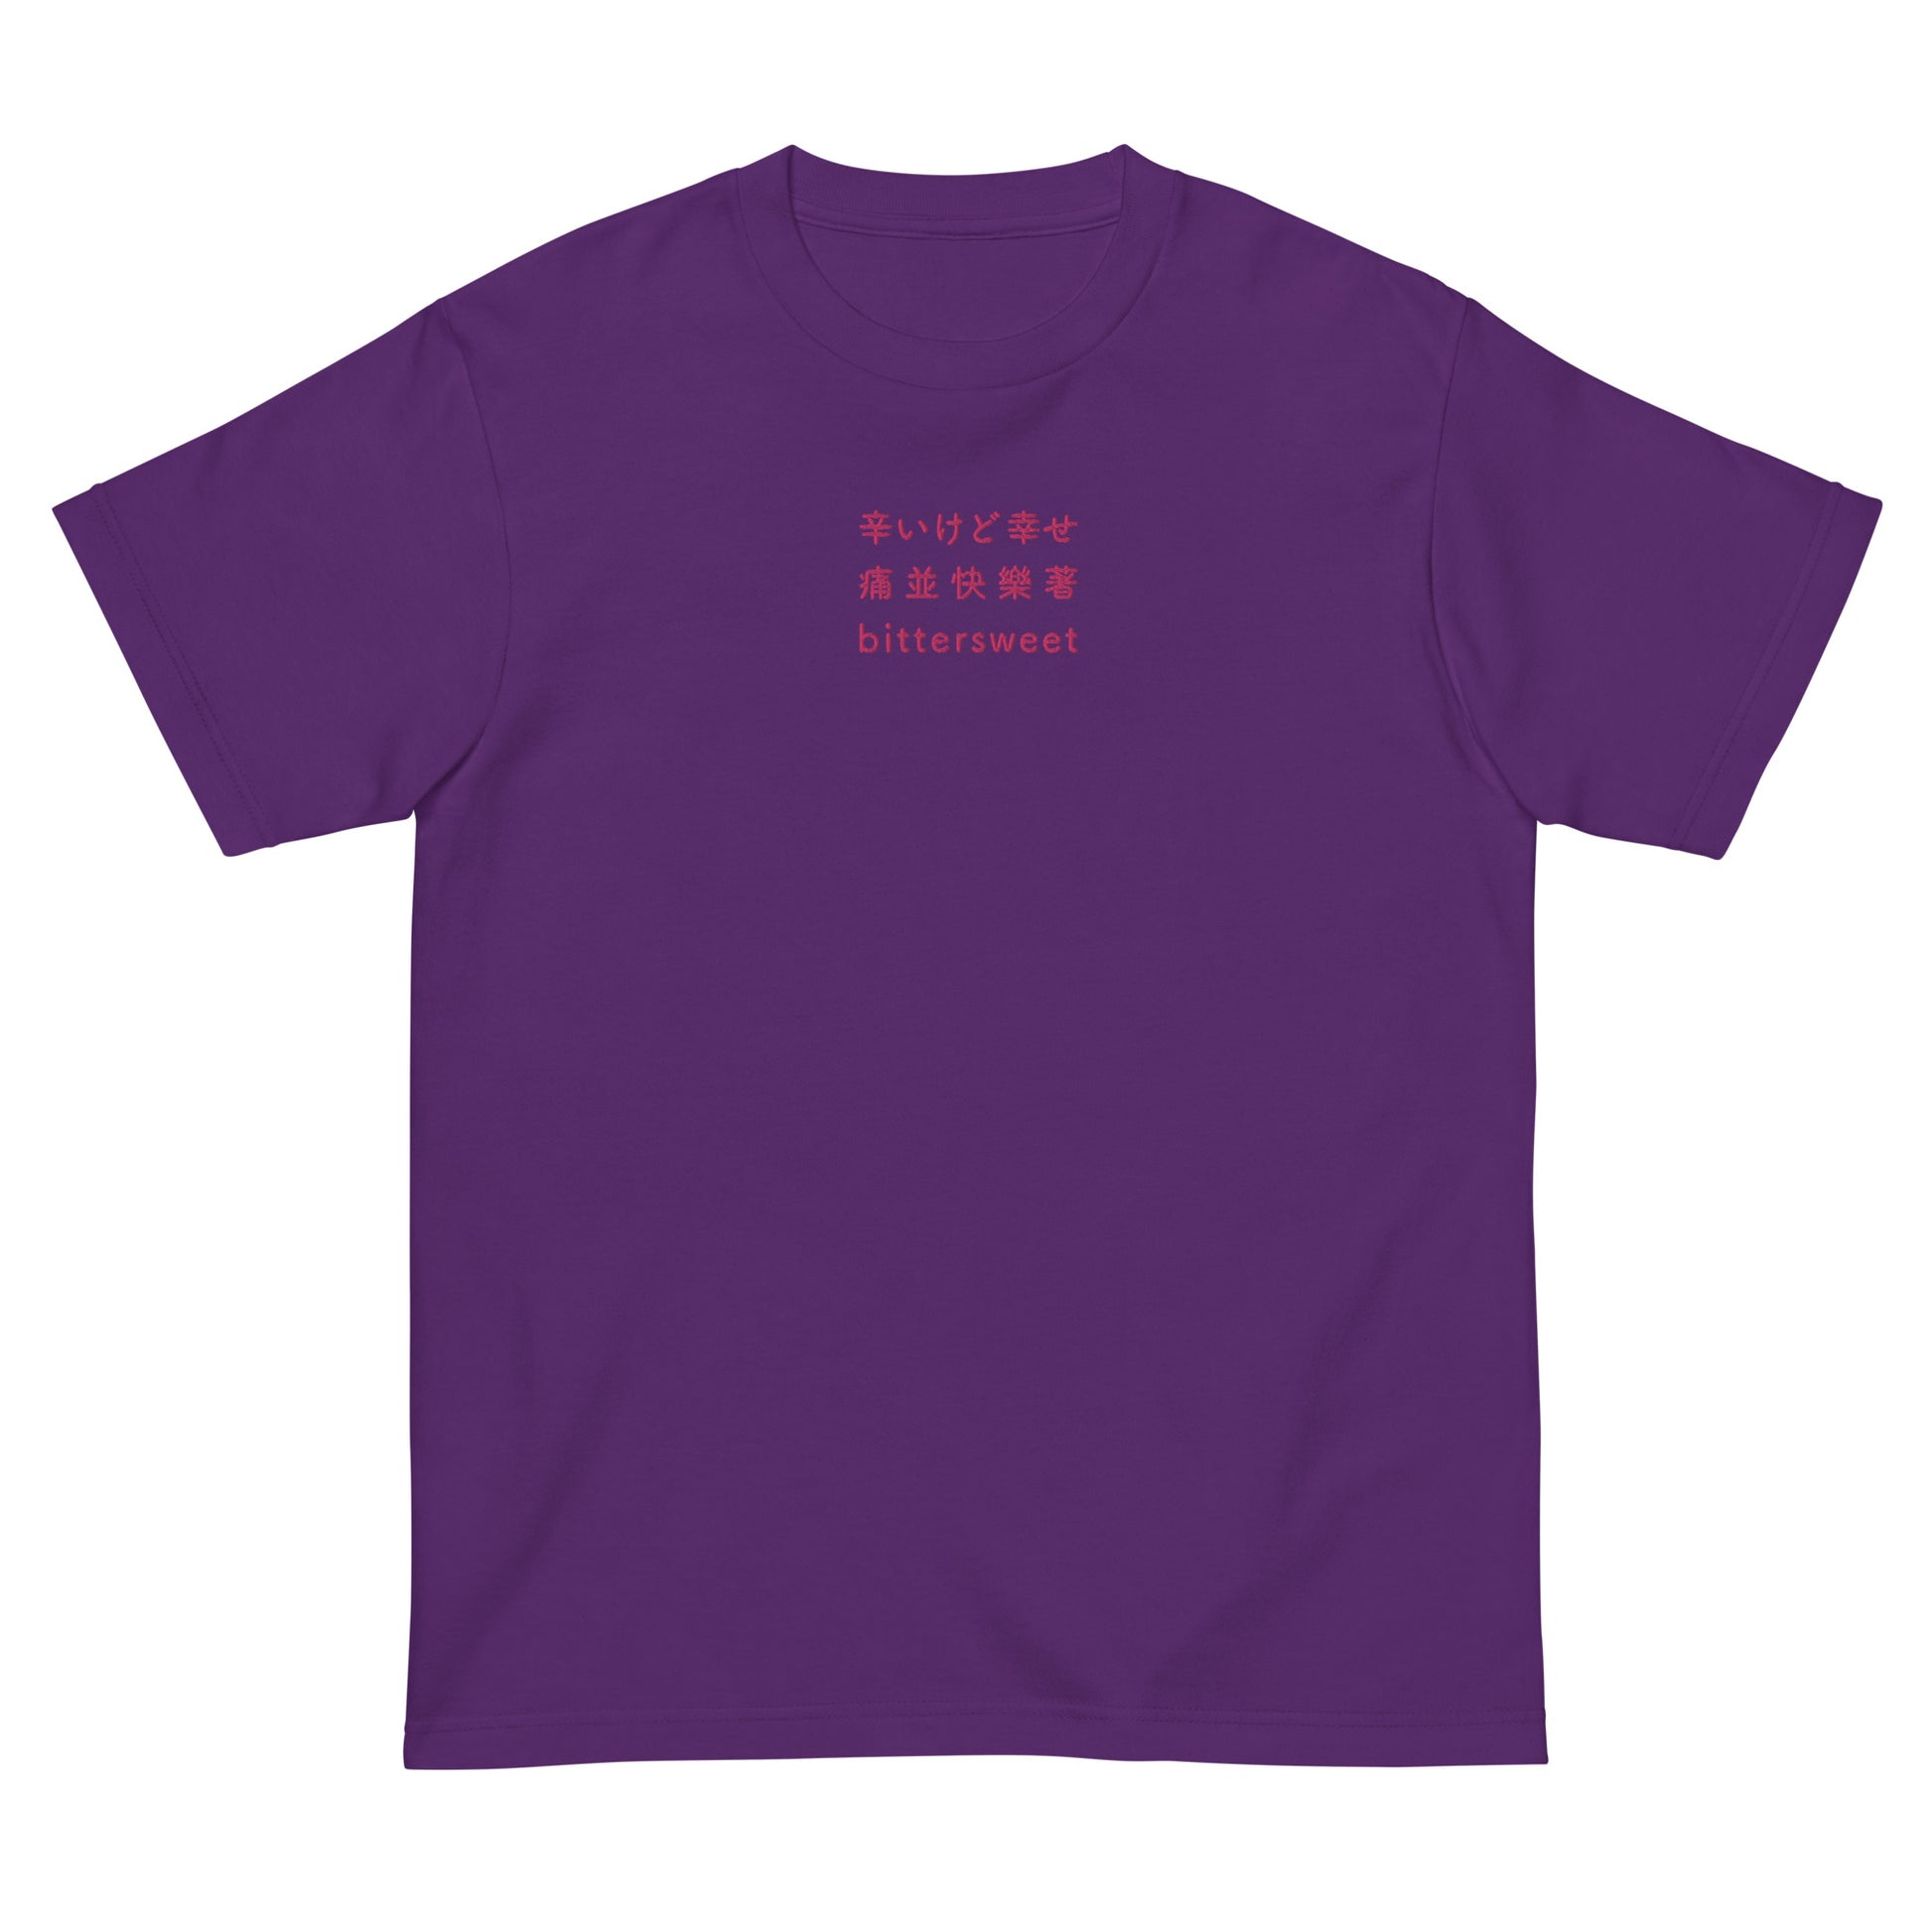 Purple High Quality Tee - Front Design with an Pink Embroidery "Bittersweet" in Japanese,Chinese and English